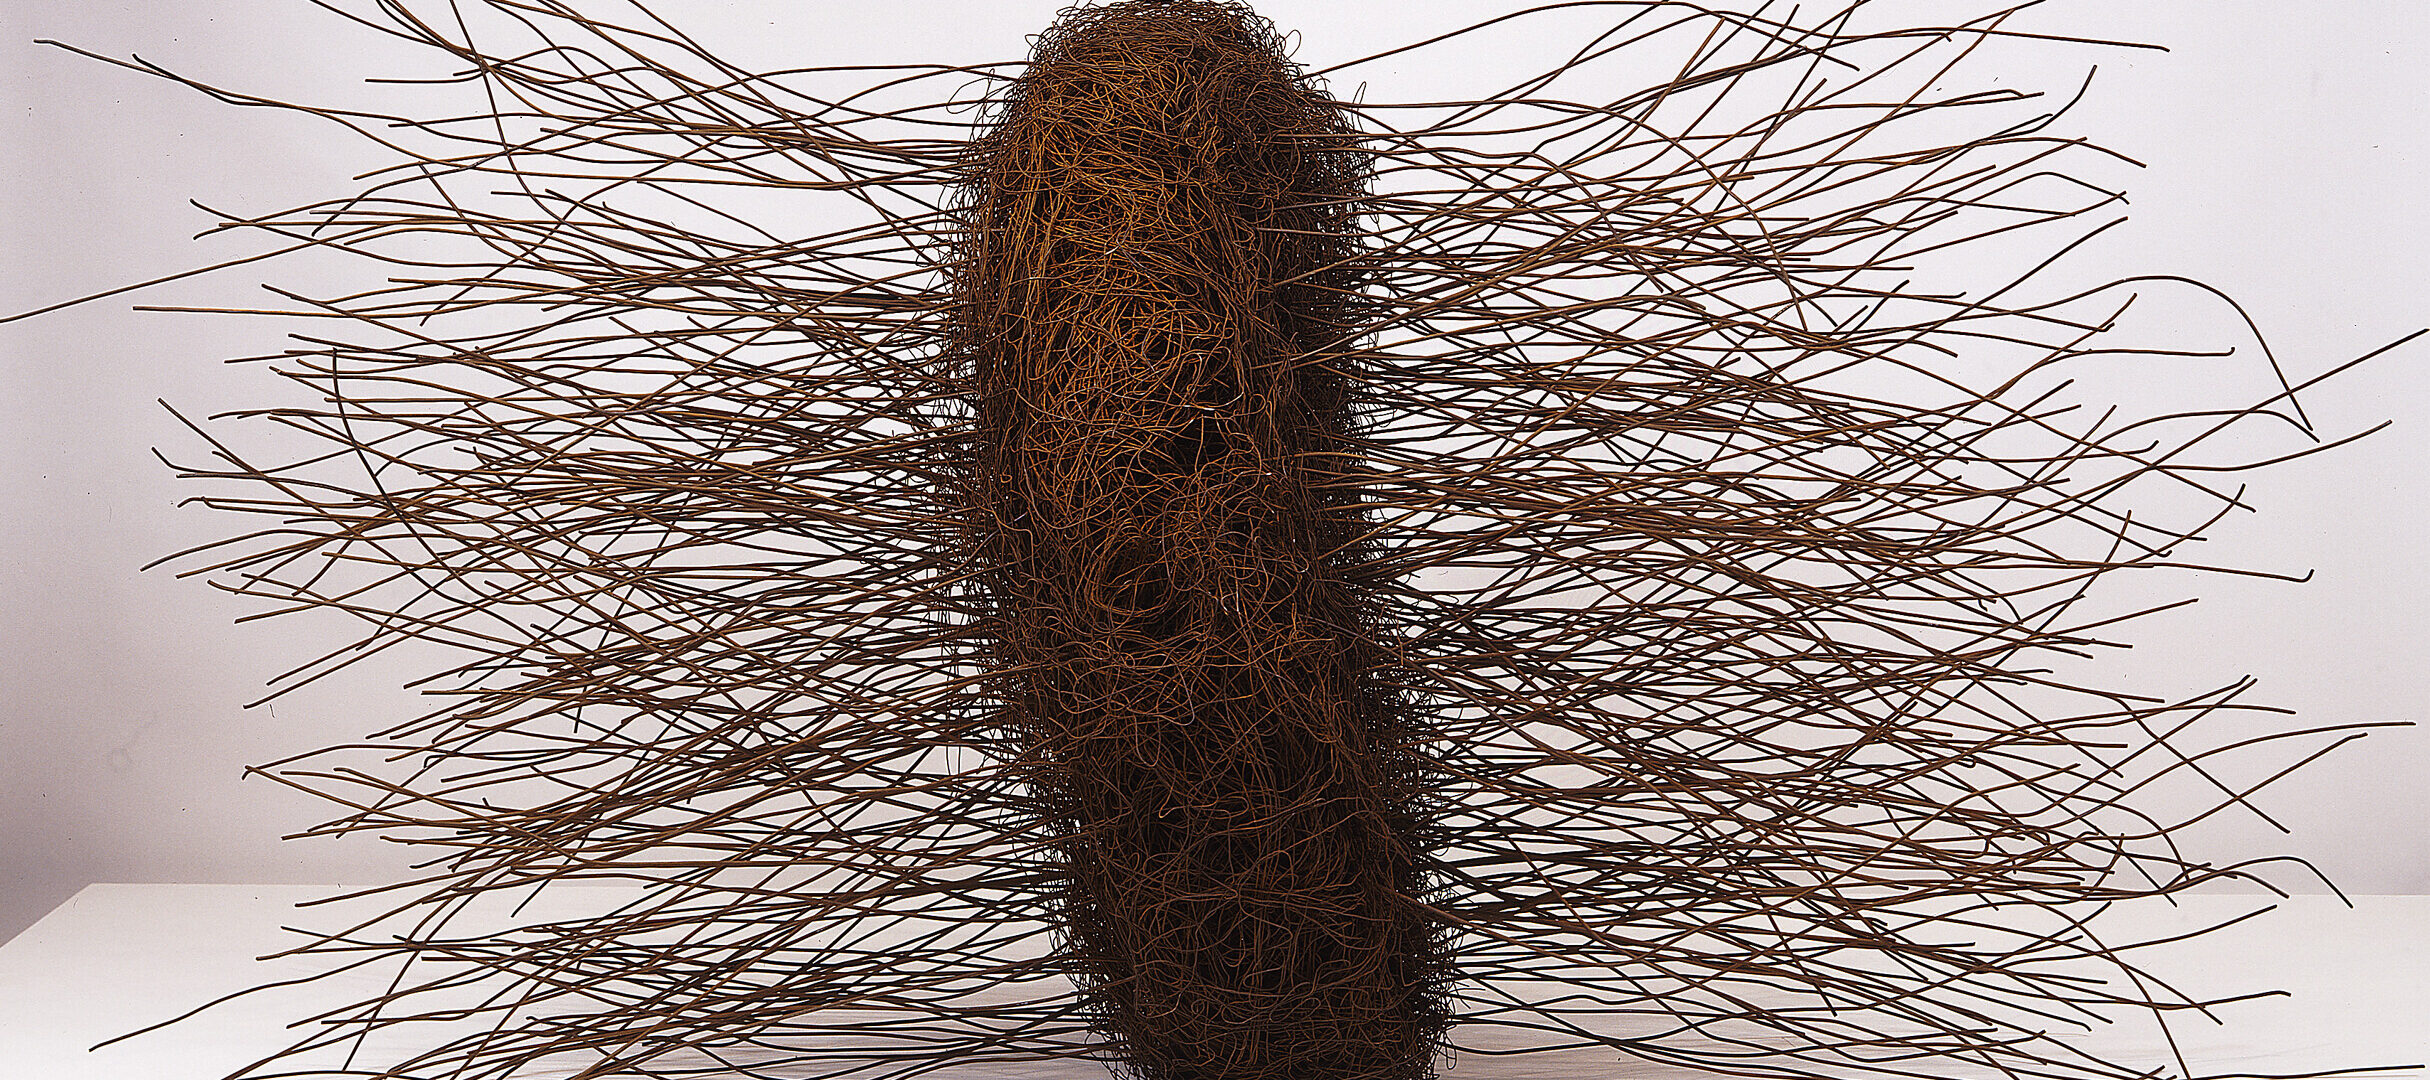 Large, abstract sculpture, fabricated of rusted iron wires, conveys an organic form. At center is a mass of thin, tangled wires shaped into a thick disc, sitting on edge. From either side of the center disc a mass of slightly bent, thicker wires juts straight out.